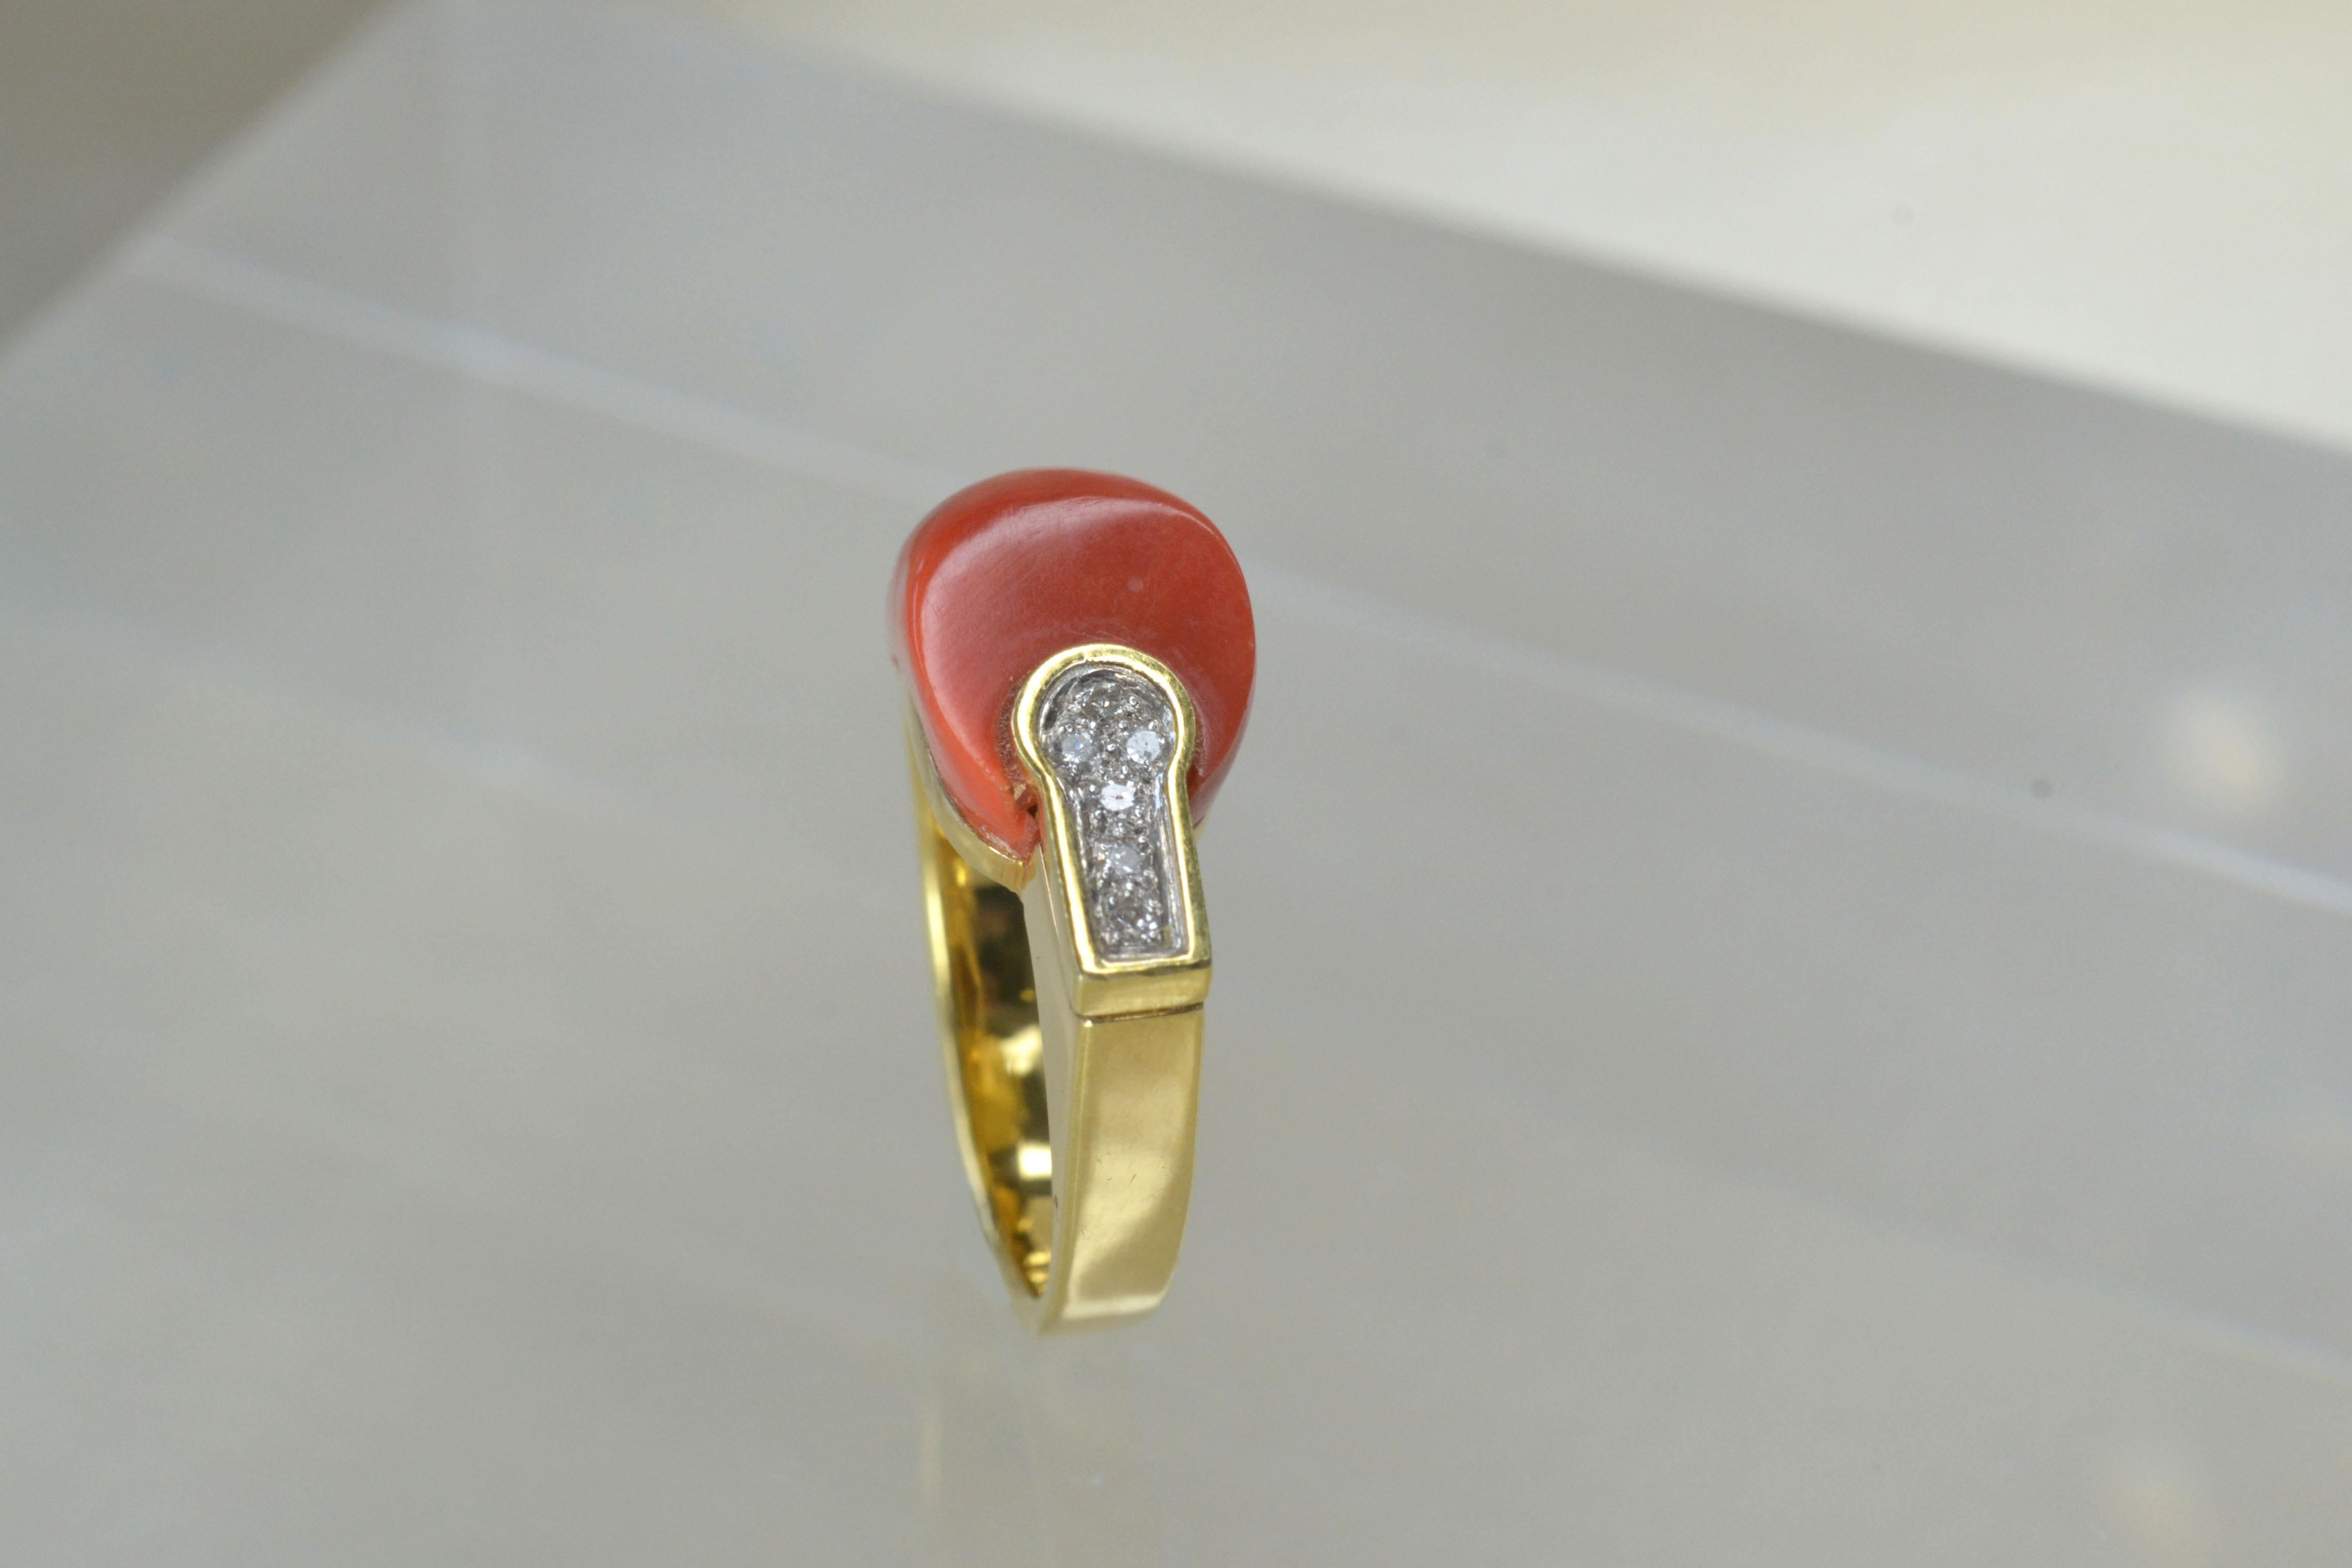 Vintage 18k Gold Coral and White Diamond Ring One-of-a-kind

This unique design features an eye-catching coral piece accompanied by dazzling row of white diamonds. This 18k gold ring is perfect for adding a splash of colour to any outfit and this